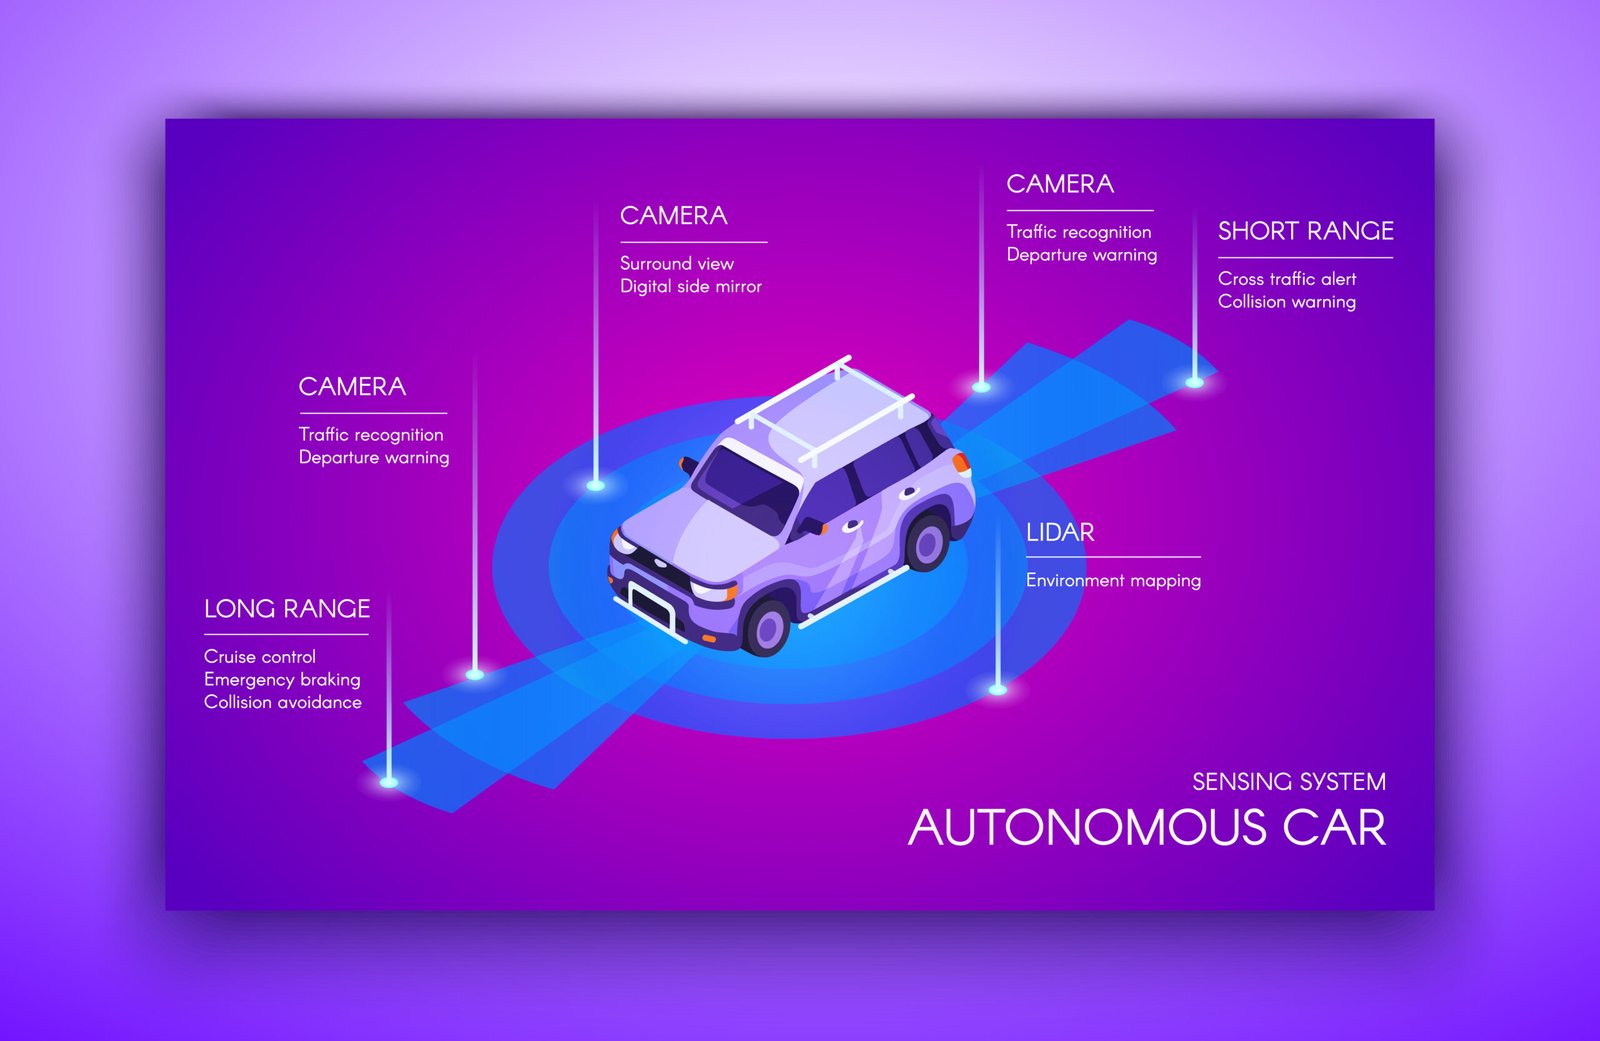 What is the future of AI in Automotive industry?